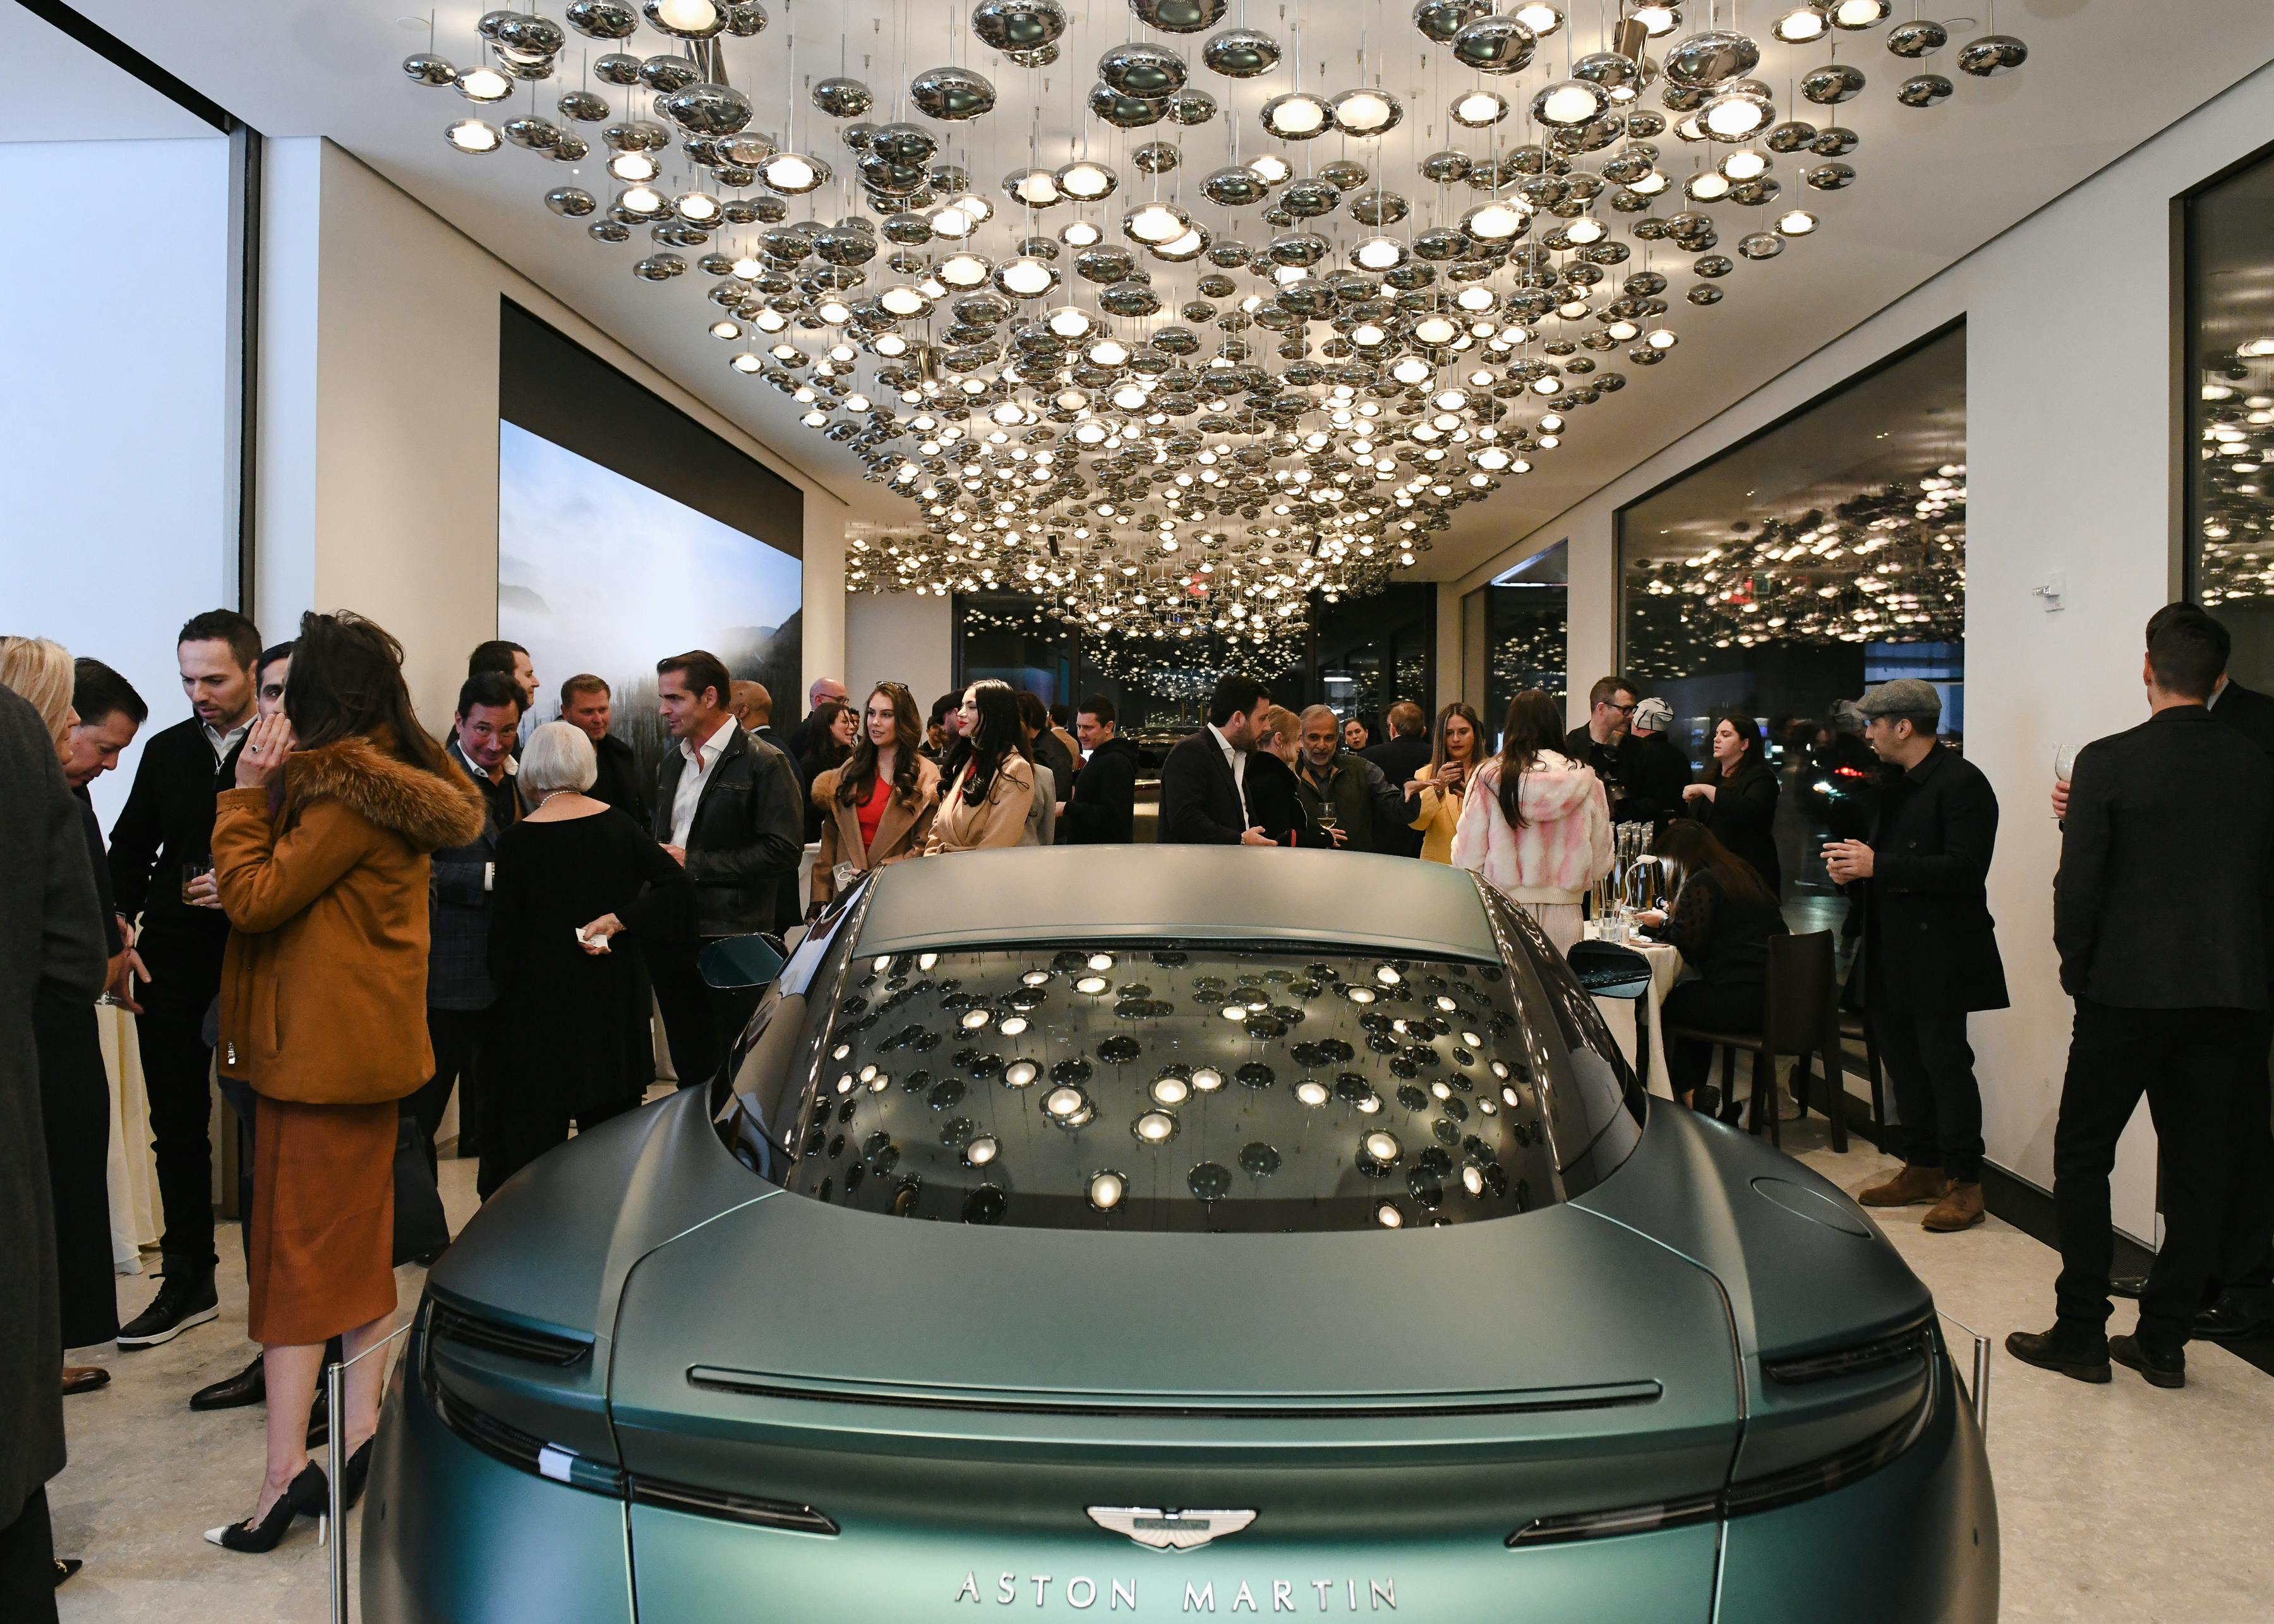 Aston Martin's Q New York showroom on Park Avenue with Elite Traveler Magazine's Watch Issue guests enjoying the ultra luxury new space